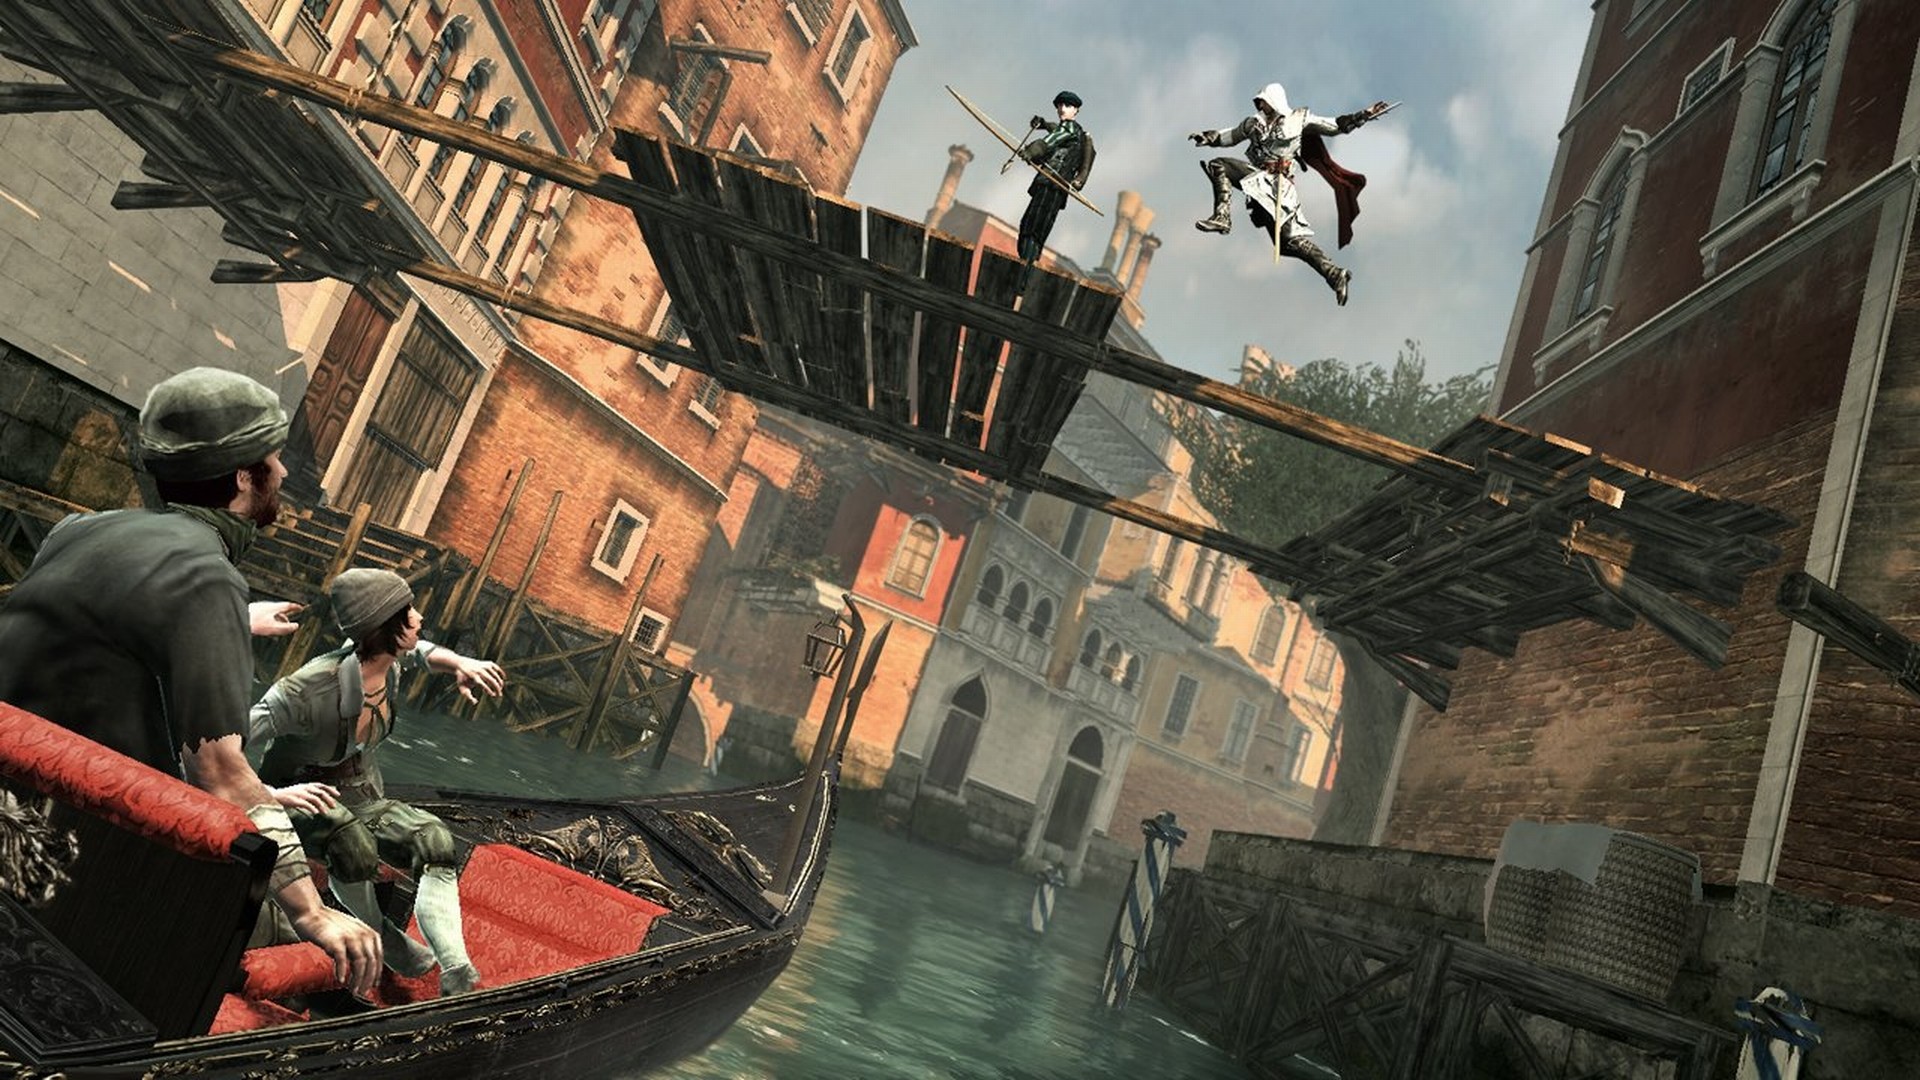 1920x1080 Video Game - Assassin's Creed II Wallpaper